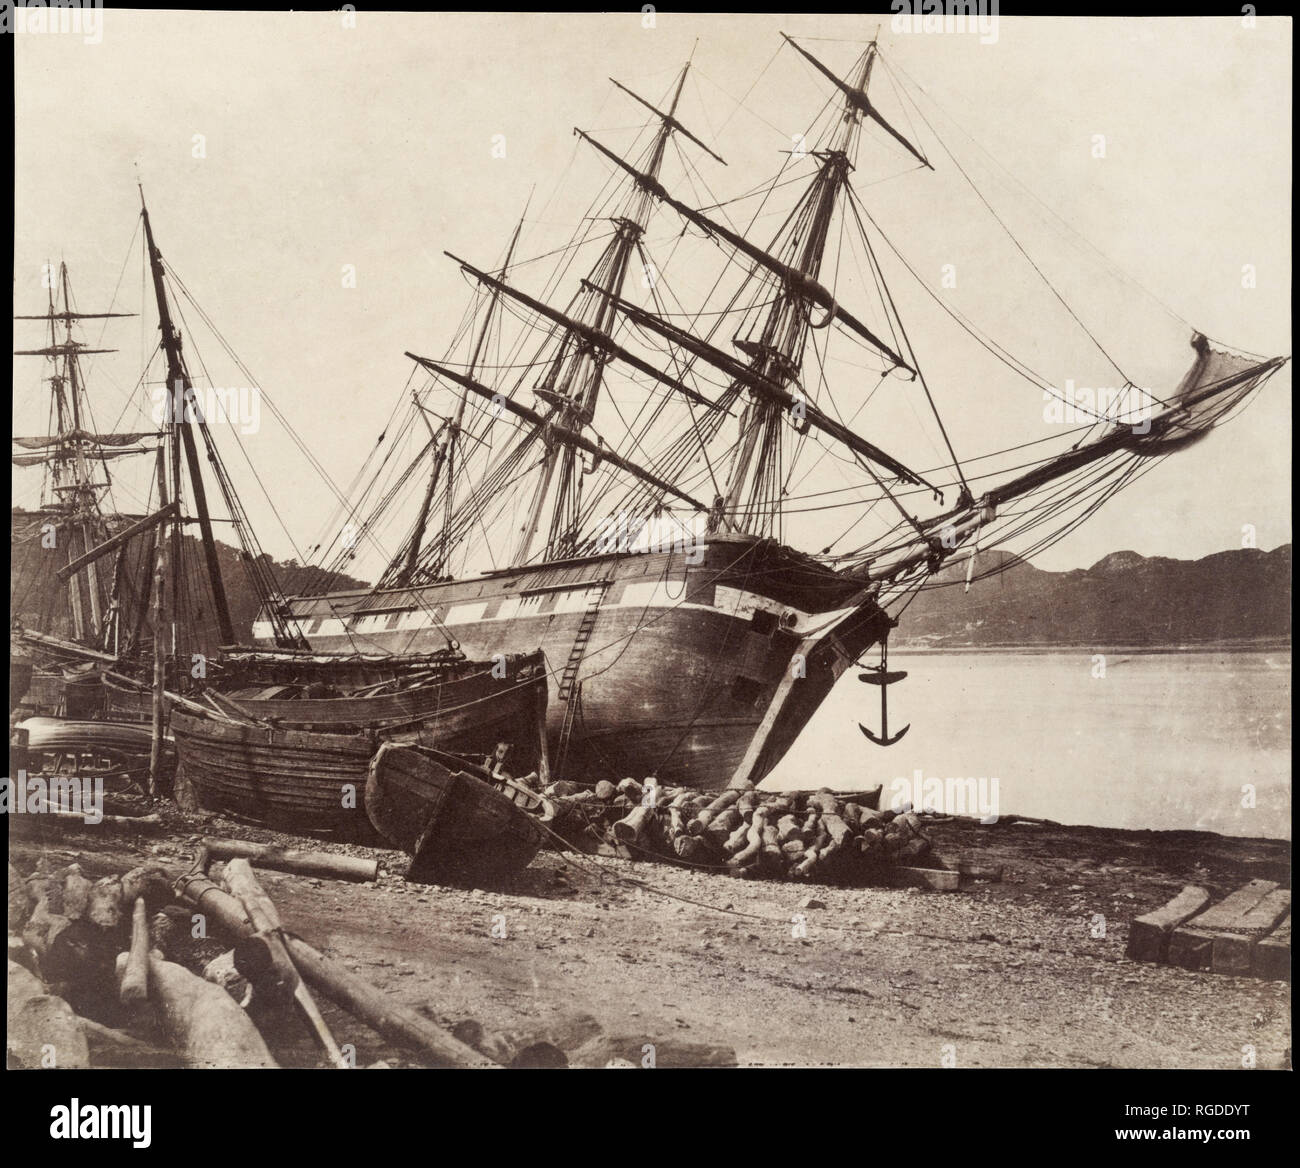 American Barque 'Jane Tudor,' Conway Bay. Artist: David Johnson (British). Dimensions: 21.9 x 26.7 cm (8 5/8 x 10 1/2 in.). Date: ca. 1855.  Little is known about Johnson, and no other picture by him has been identified.  He was listed as a 'Photographic Artist' in the directory of the industrial city of Blackburn, Lancashire, during the mid-1850s, suggesting that he ran a professional studio.  Whether or not this photograph was made for a commercial purpose, it is clearly an application of the still-new medium to a traditional subject of art, and Johnson showed it as such at the 1856 exhibiti Stock Photo